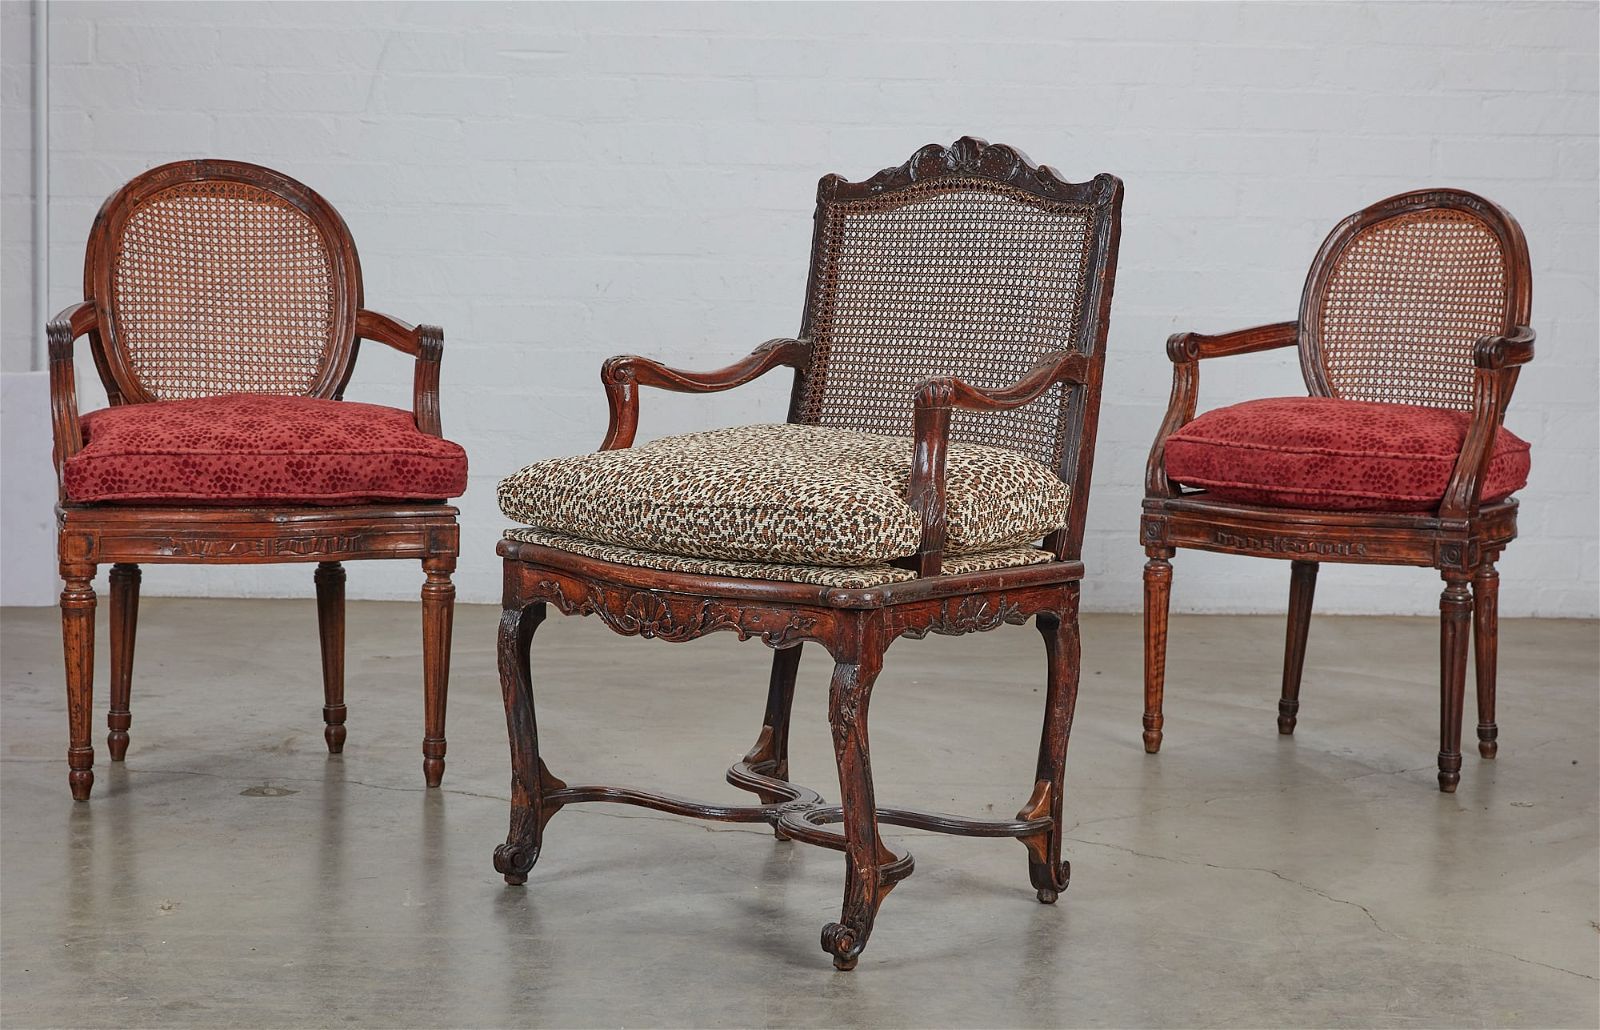 TWO LOUIS XVI FAUTEUILS AND A REGENCE